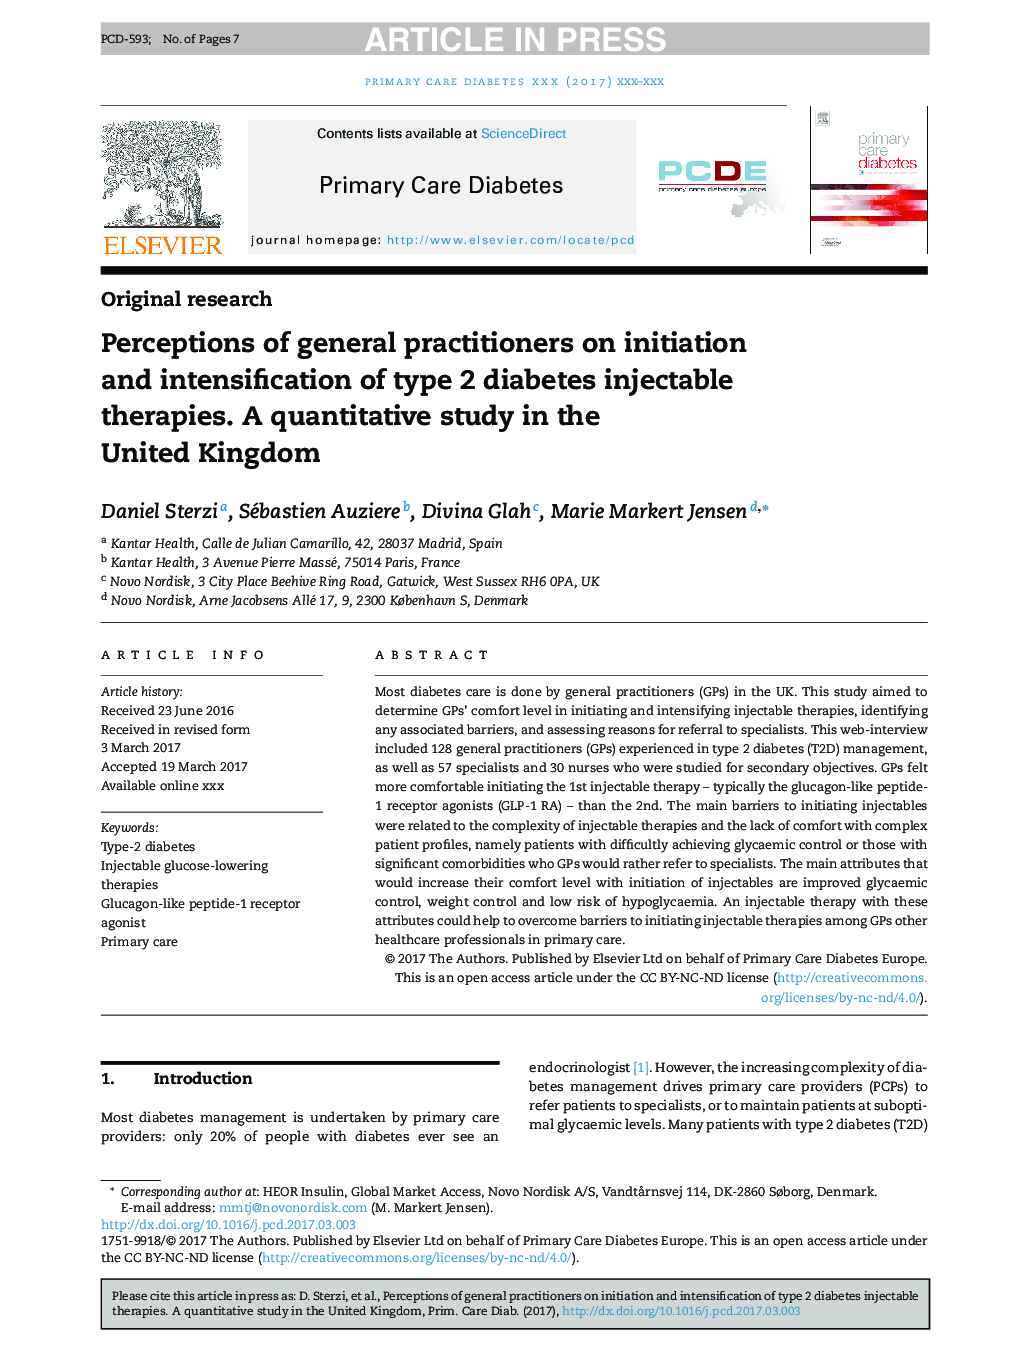 Perceptions of general practitioners on initiation and intensification of type 2 diabetes injectable therapies. A quantitative study in the United Kingdom